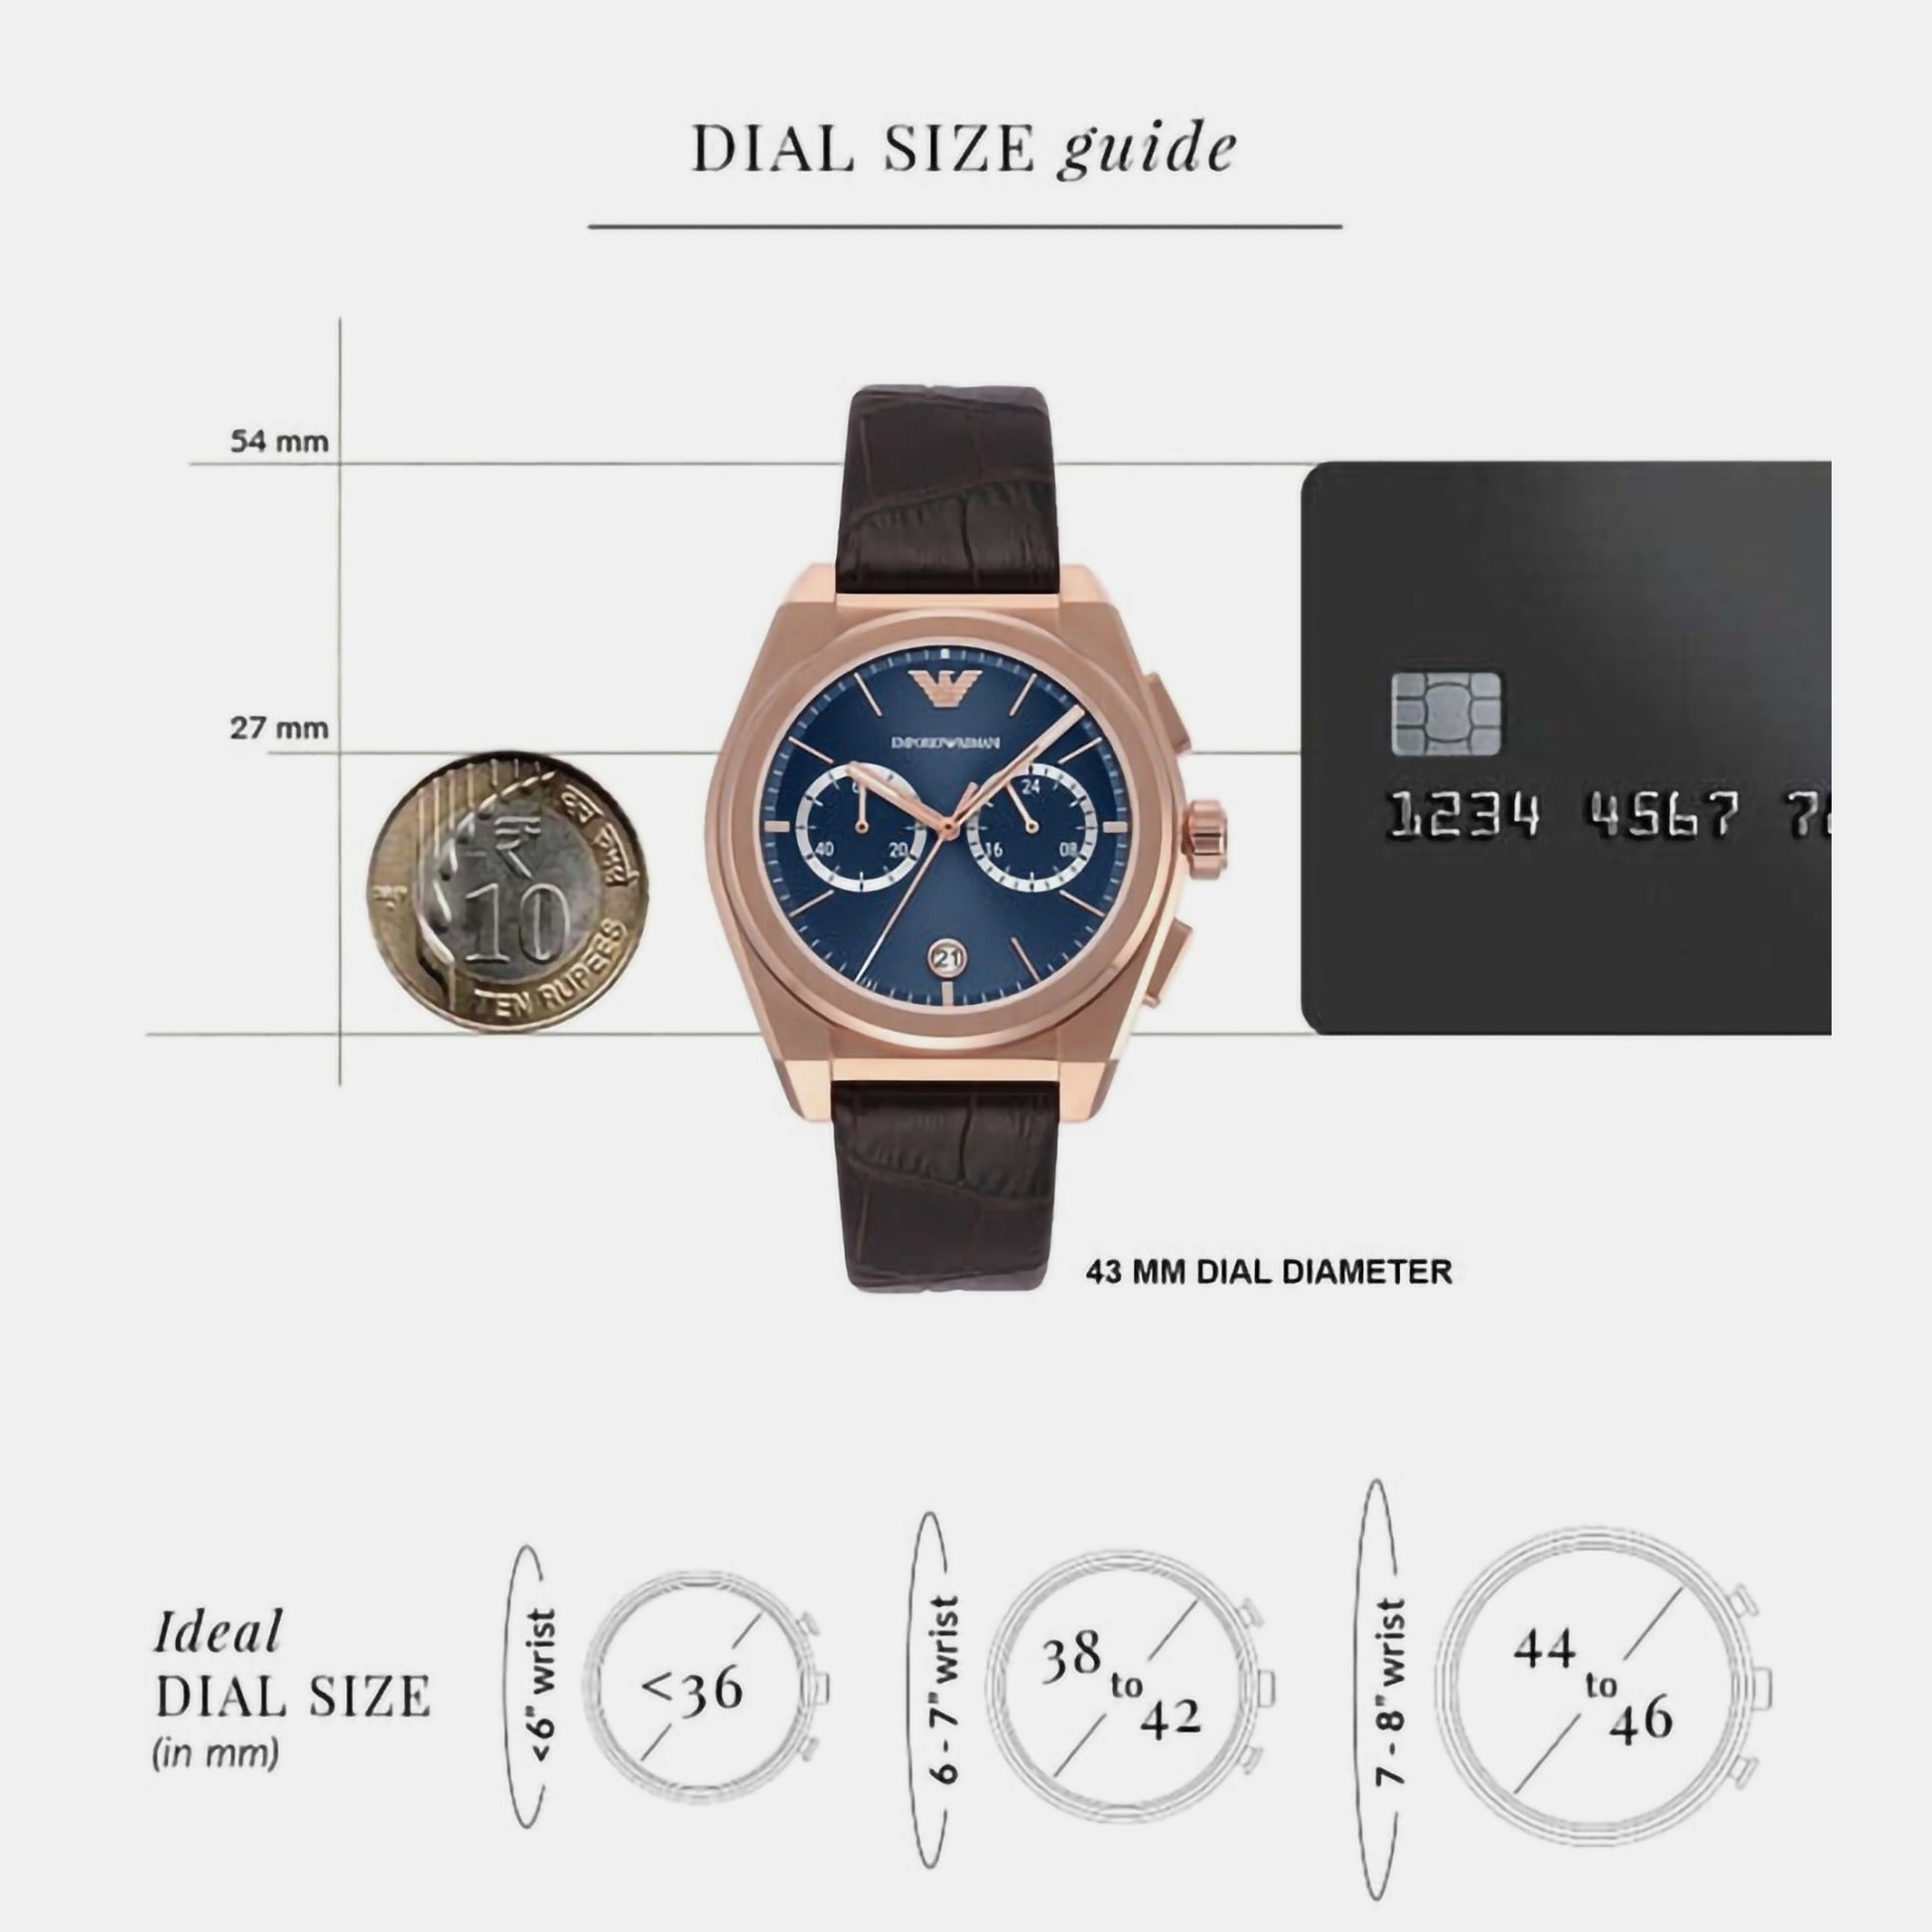 Male Blue Chronograph Leather Watch AR11563 – Just In Time